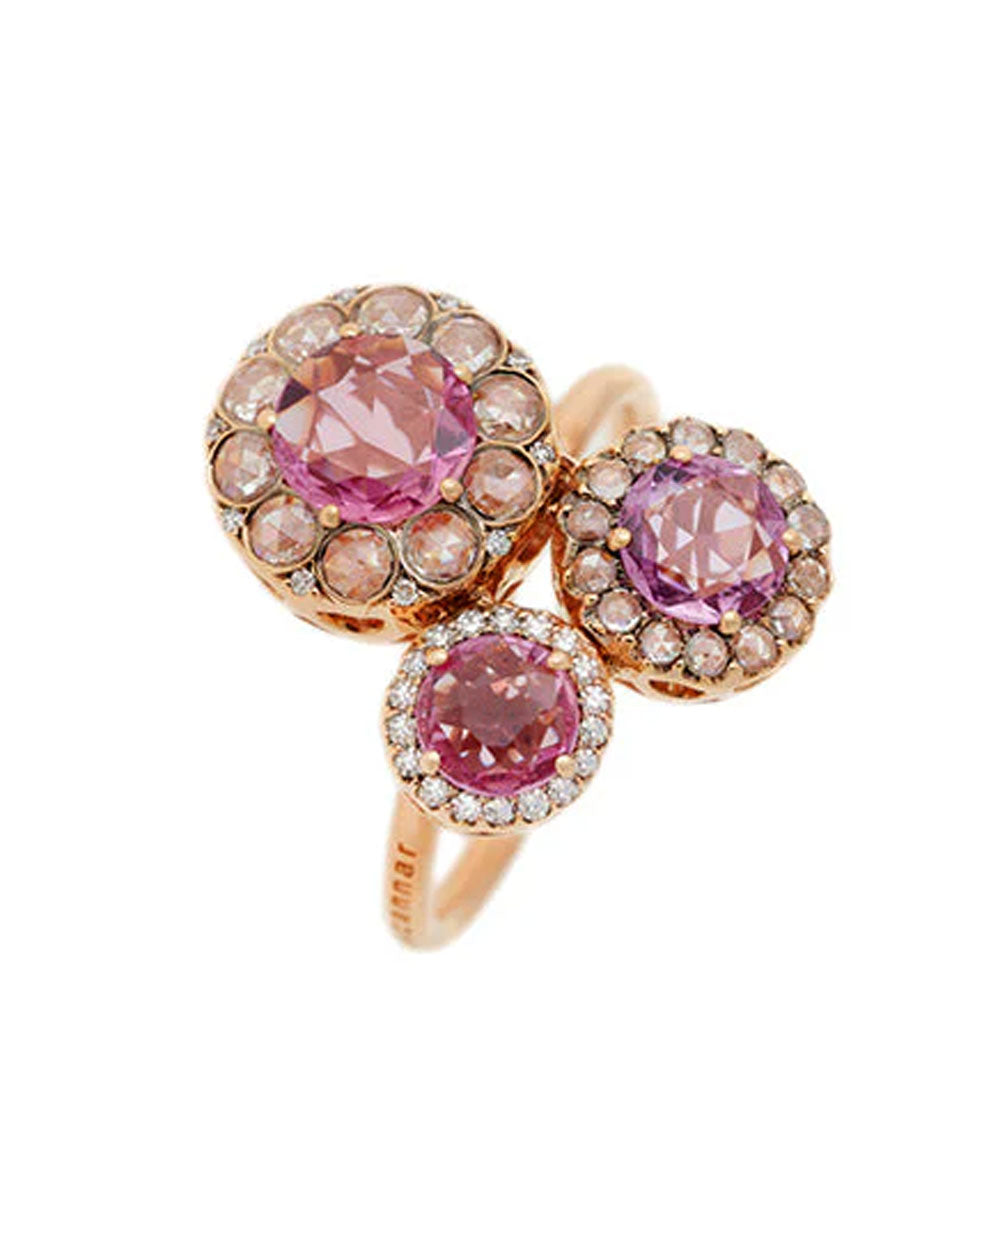 Pink Sapphire and Diamond Beirut Rosace Ring